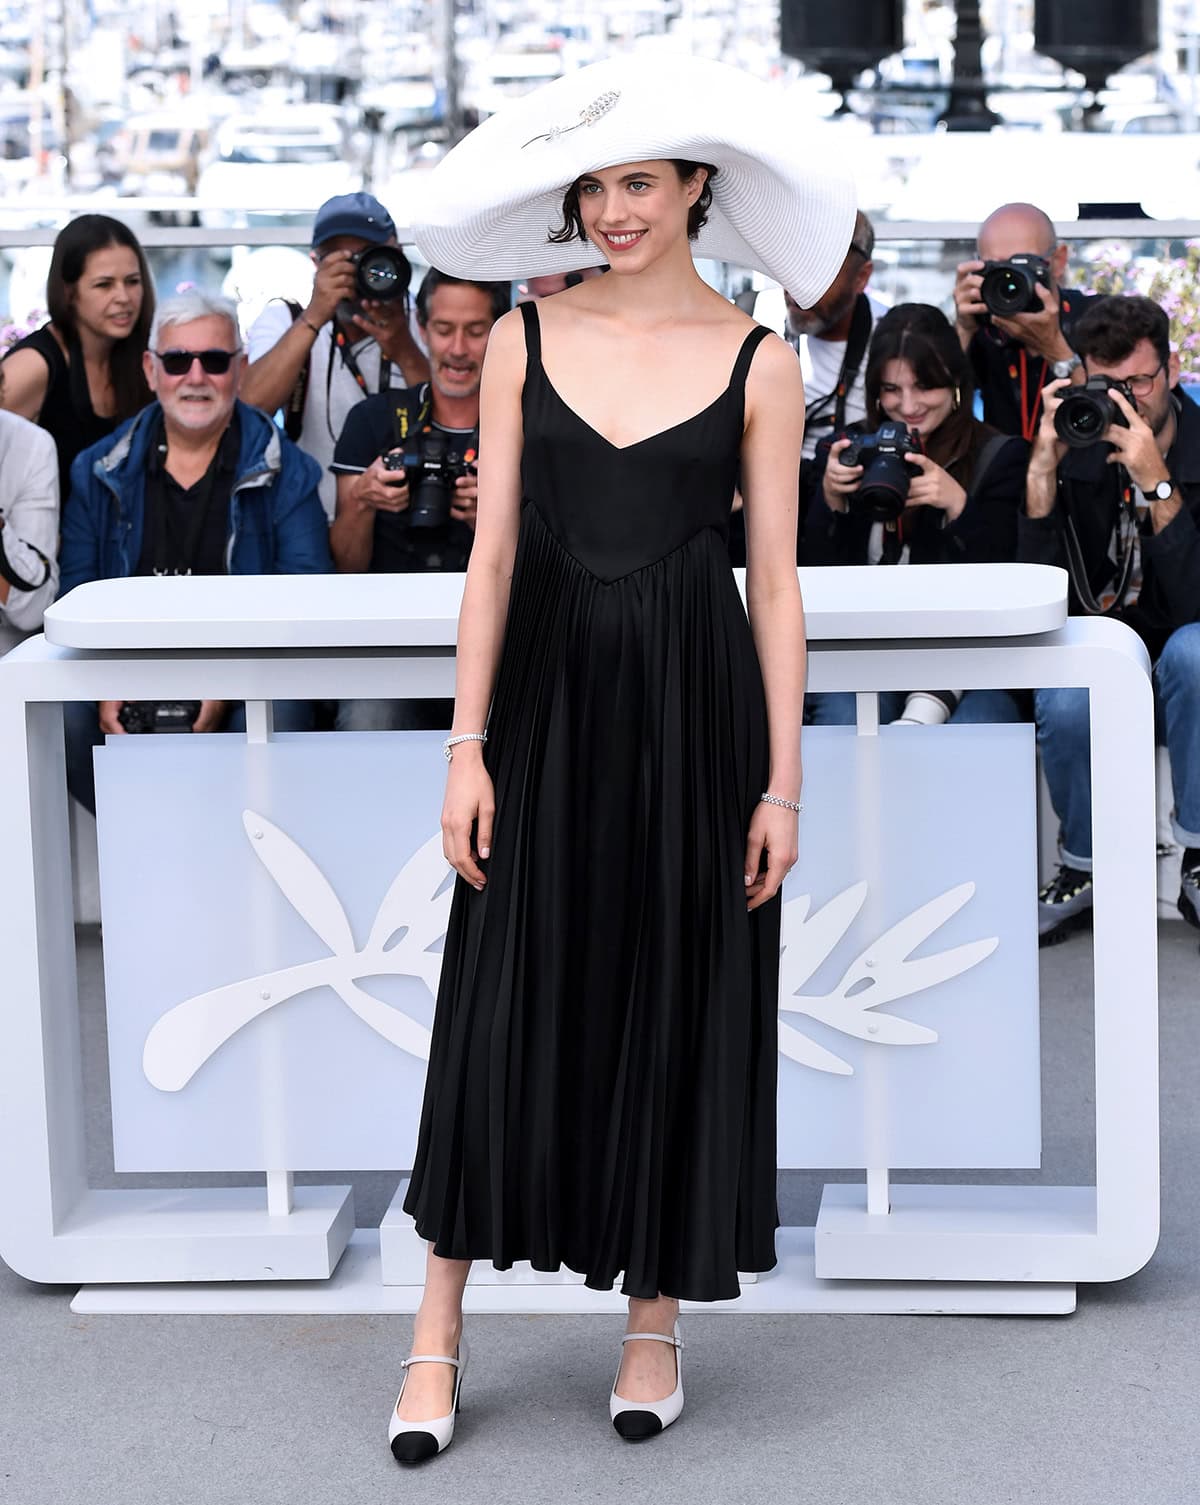 Margaret Qualley embraces 1980s summer French chic in a flowy black plunging dress by Chanel with an oversized white hat on the French Riviera